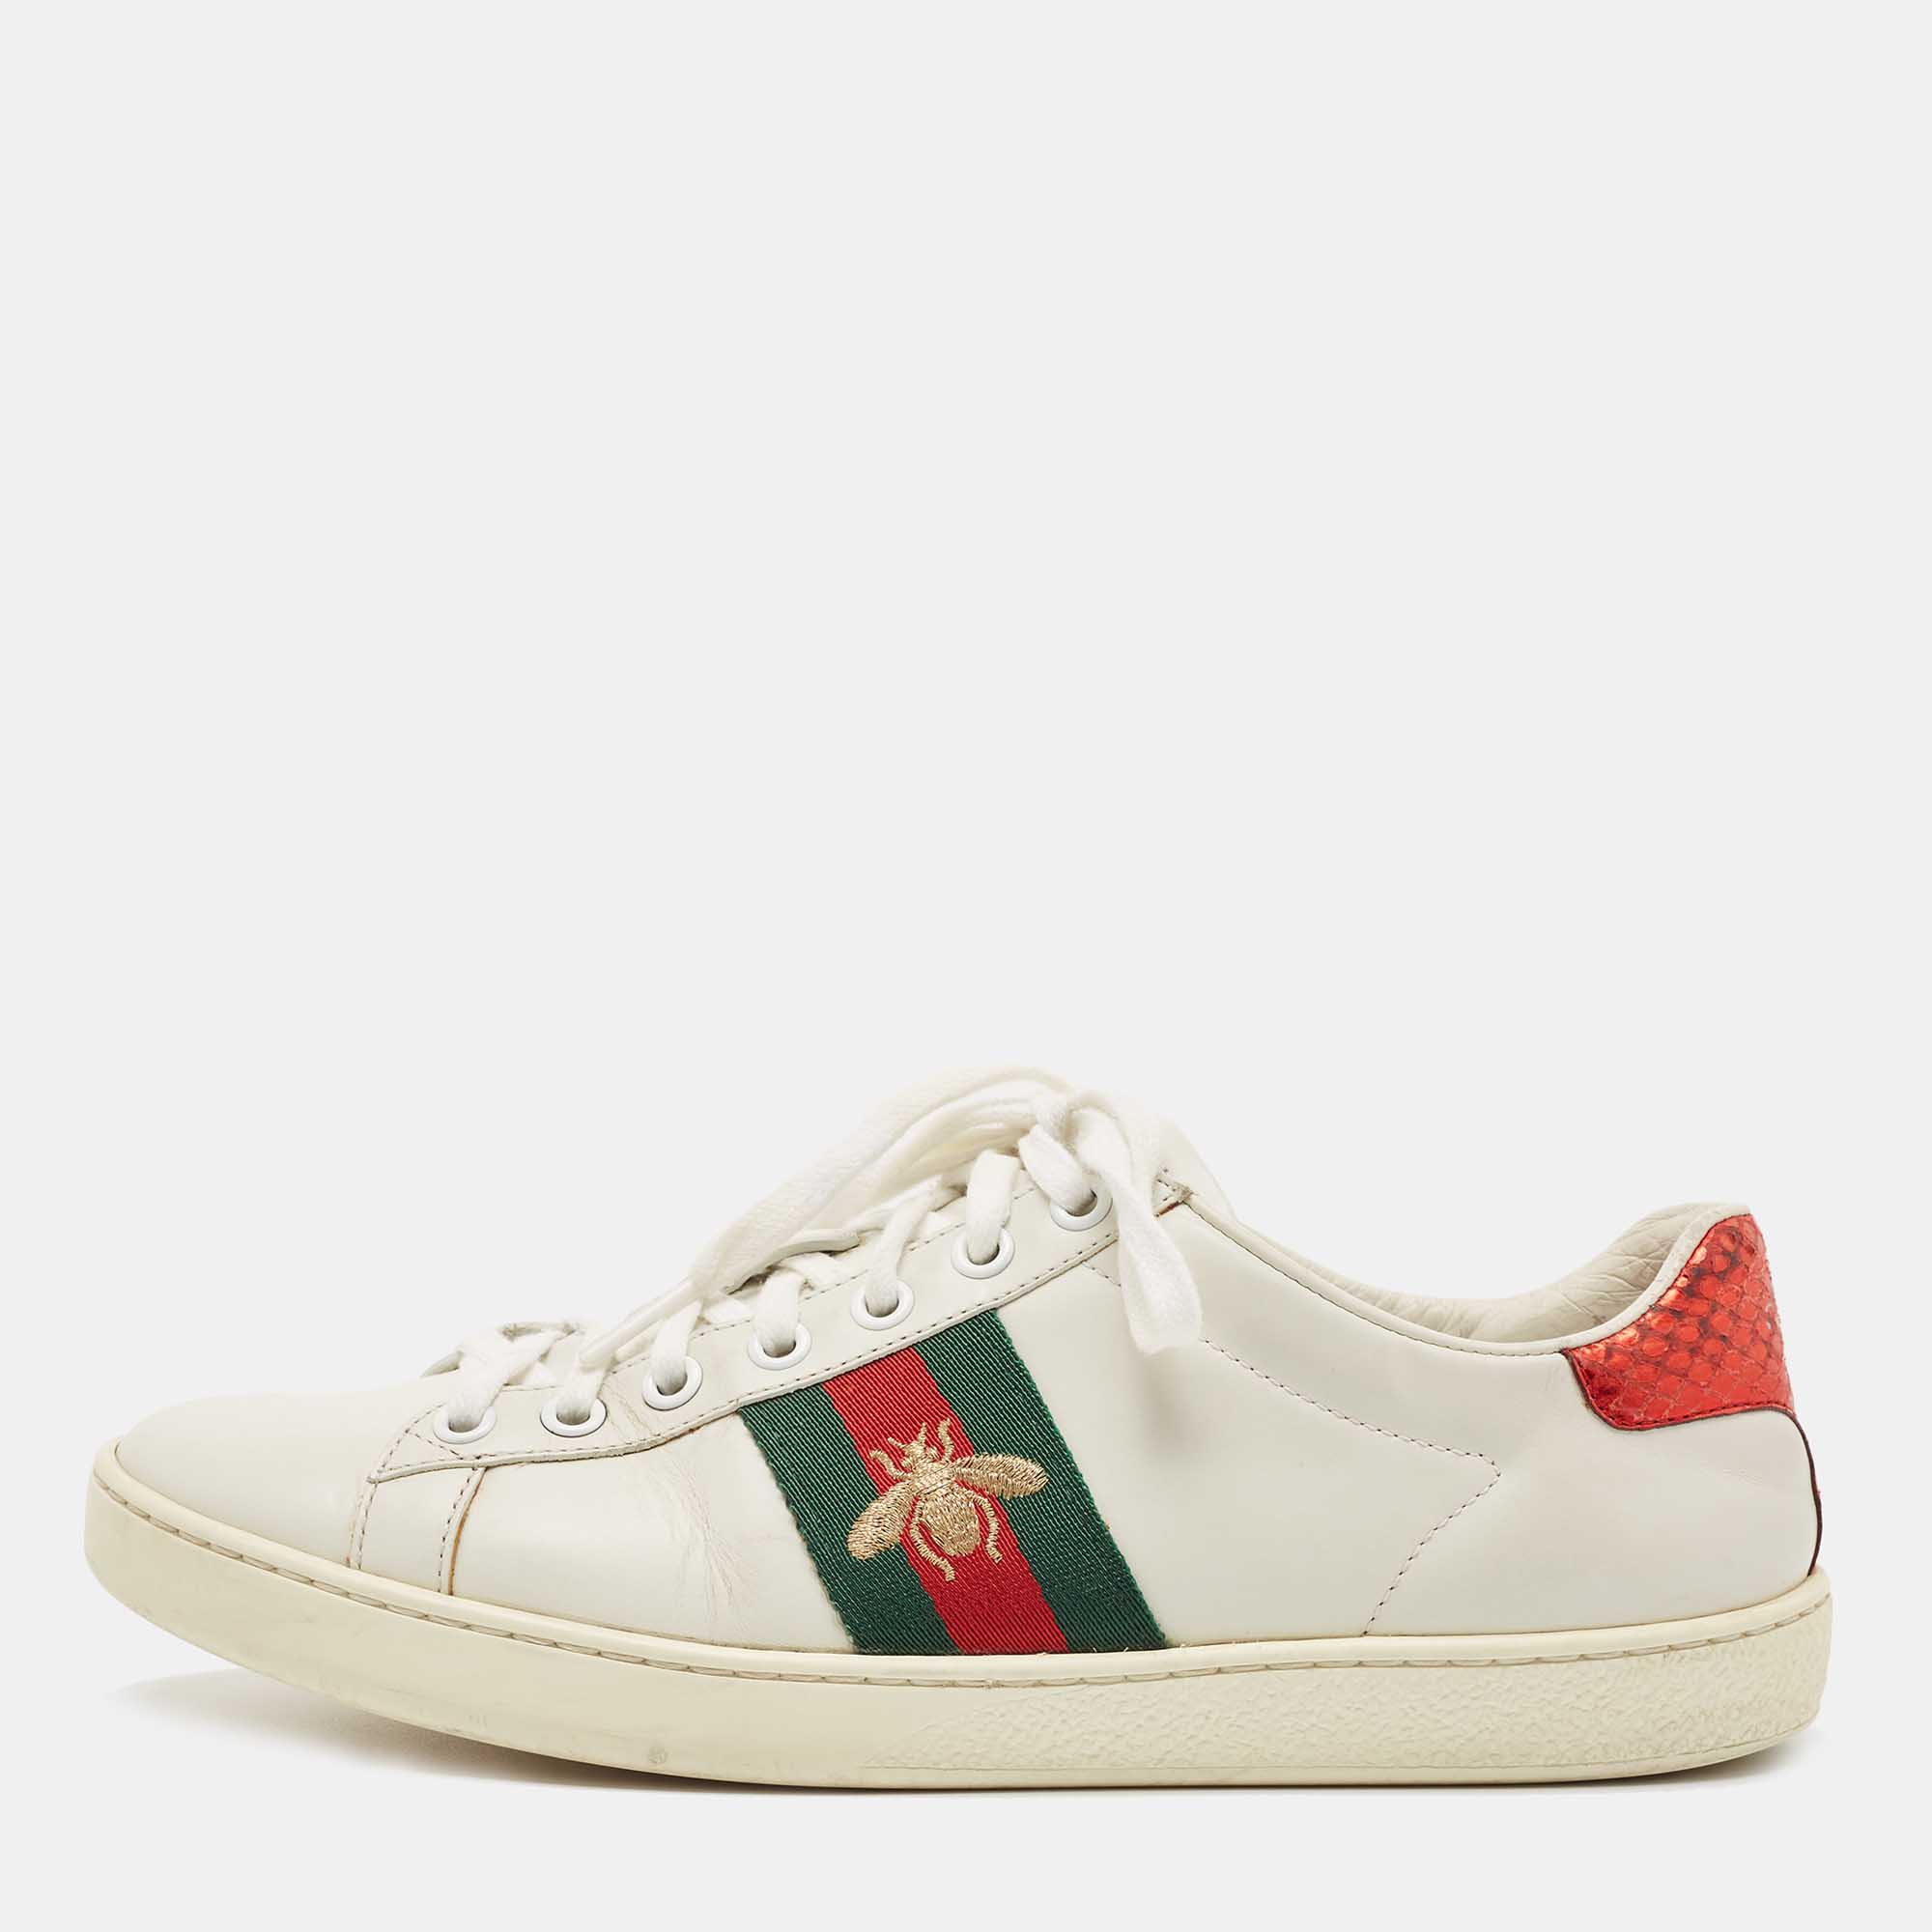 Pre-owned Gucci White Leather Embroidered Bee Ace Trainers Size 37.5